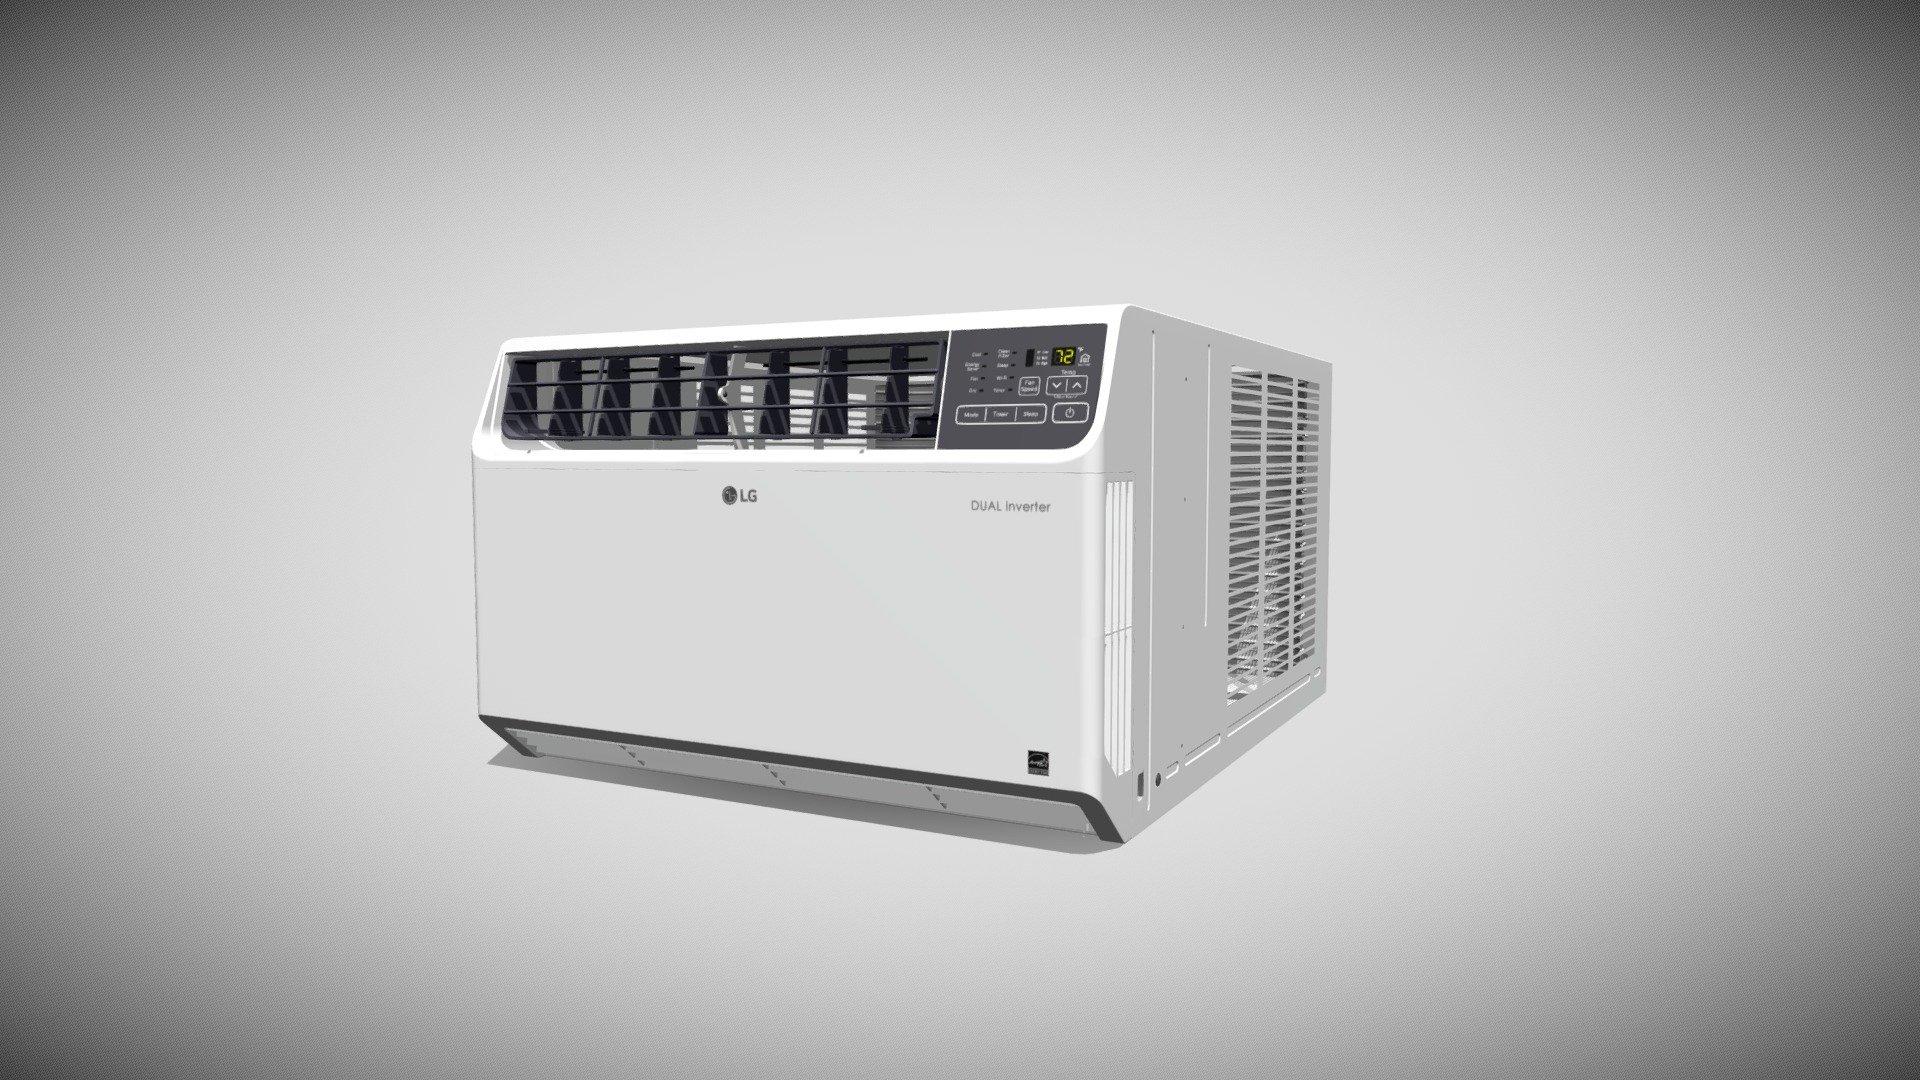 Detailed model of an LG Window Air Conditioner, modeled in Cinema 4D.The model was created using approximate real world dimensions.

The model has 38,148 polys and 38,571 vertices.

An additional file has been provided containing the original Cinema 4D project file, textures and other 3d export files such as 3ds, fbx and obj 3d model